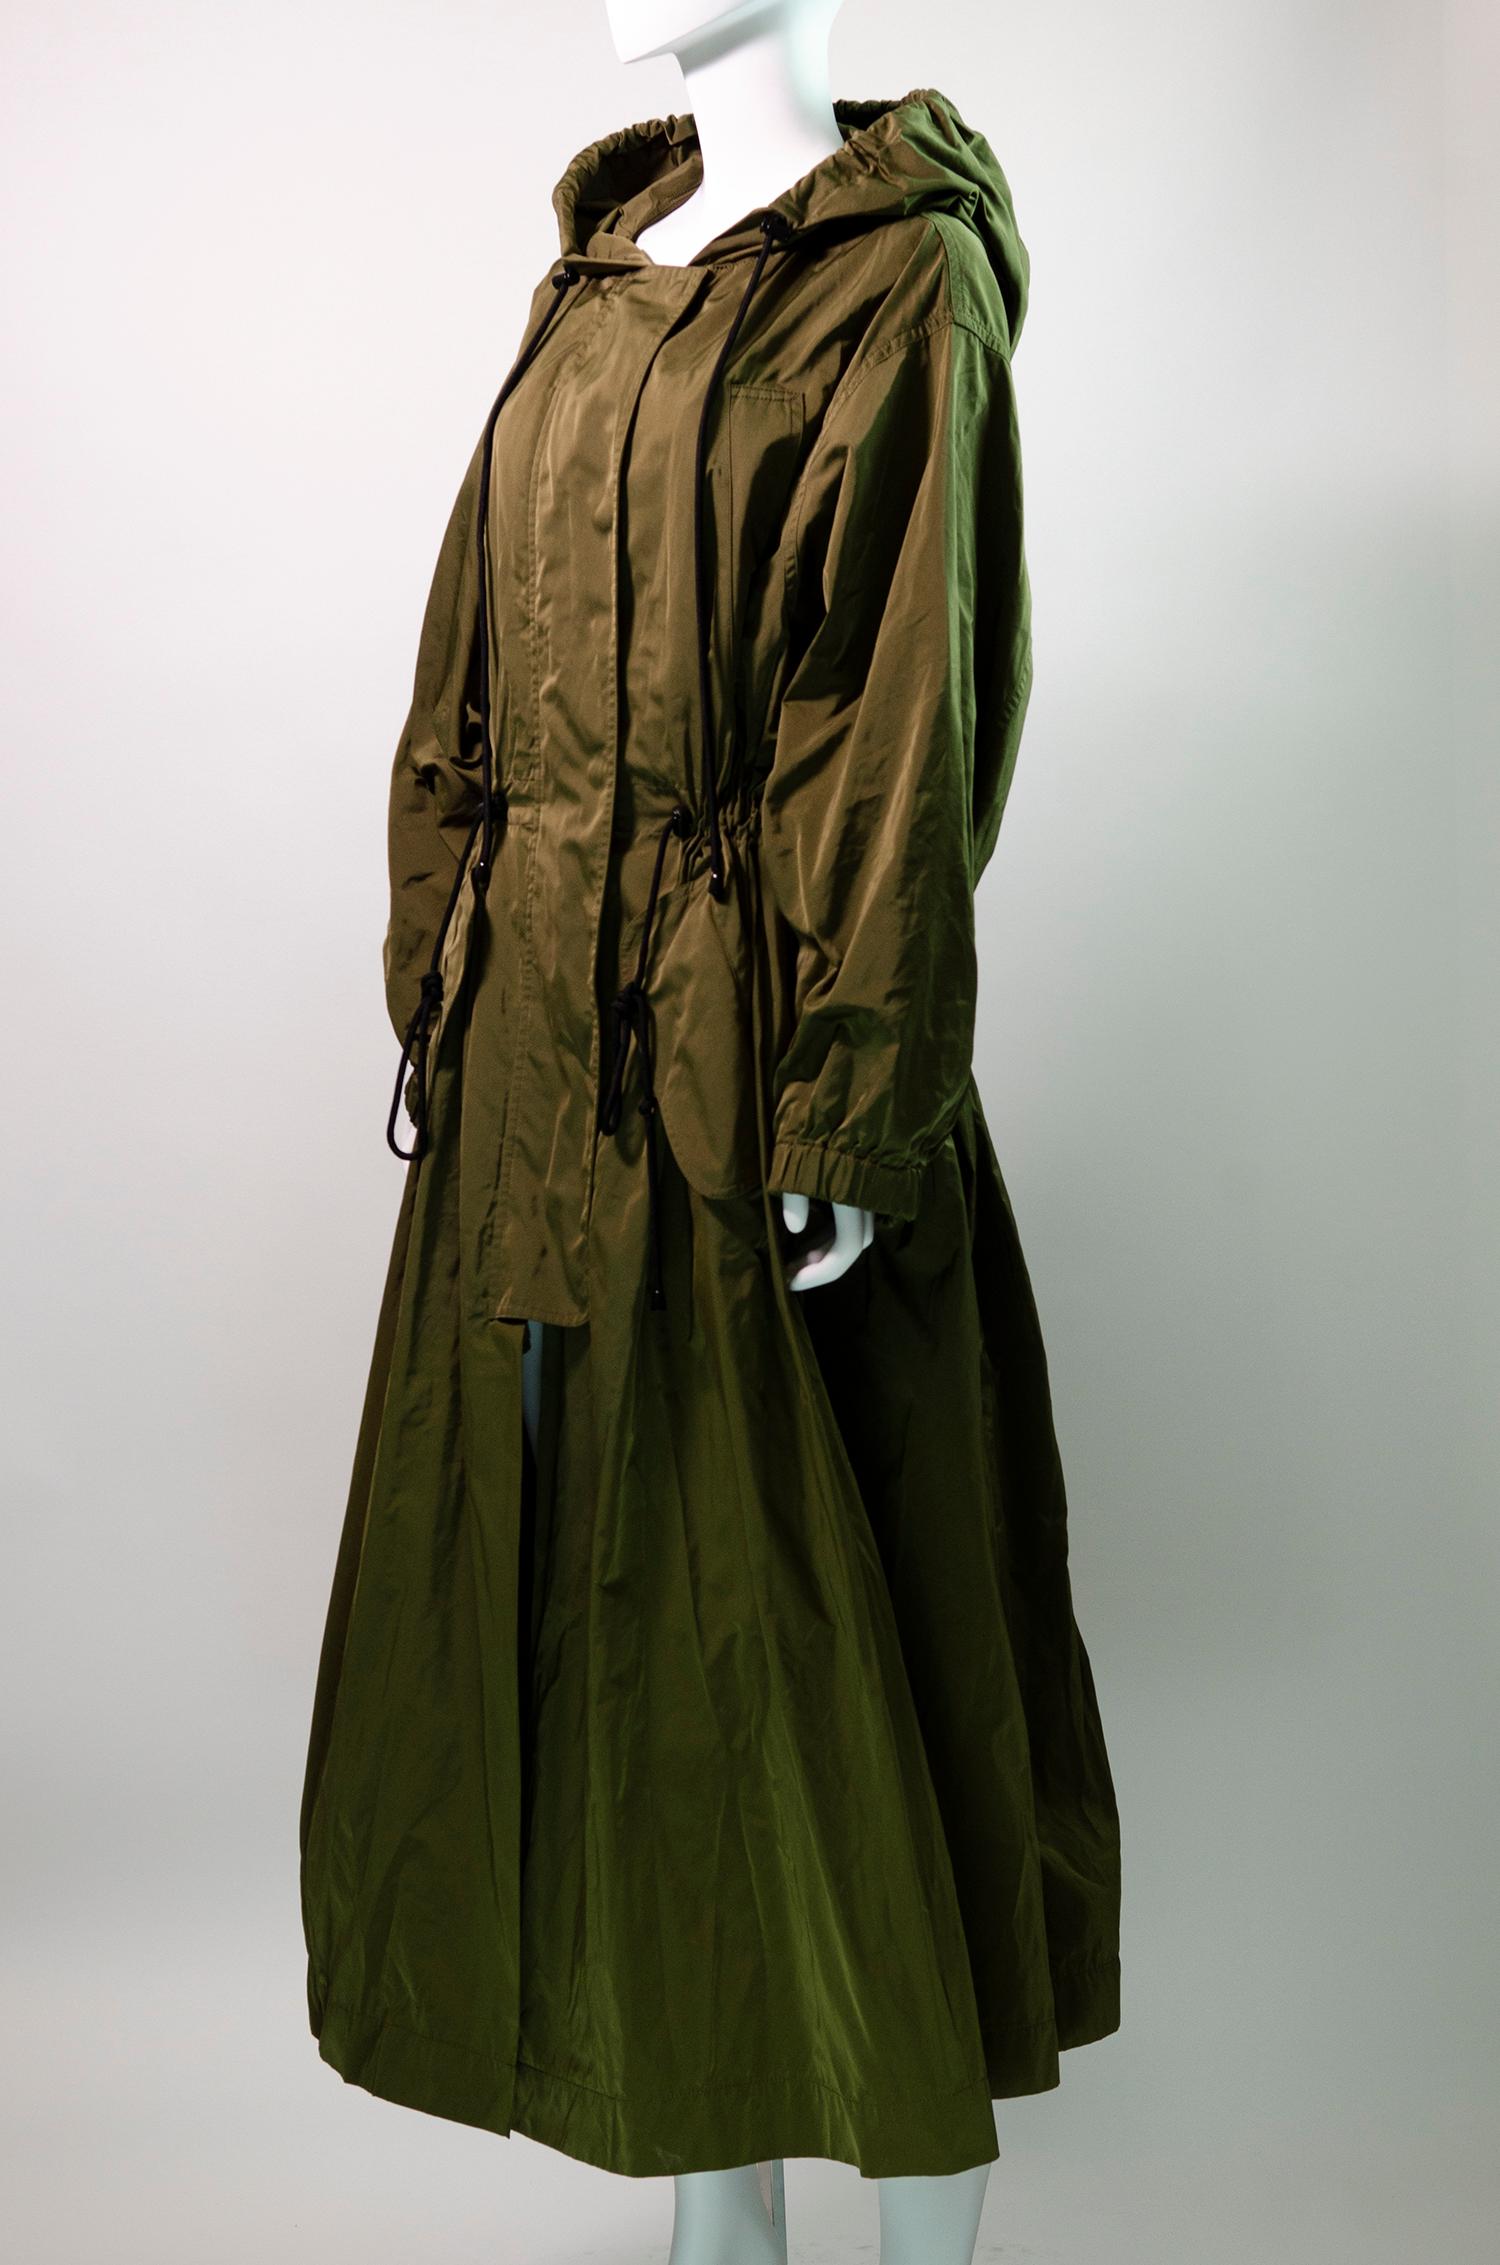 DRIES VAN NOTEN Oversized Nylon Khaki Parka With Hood Unisex In Excellent Condition For Sale In Berlin, BE